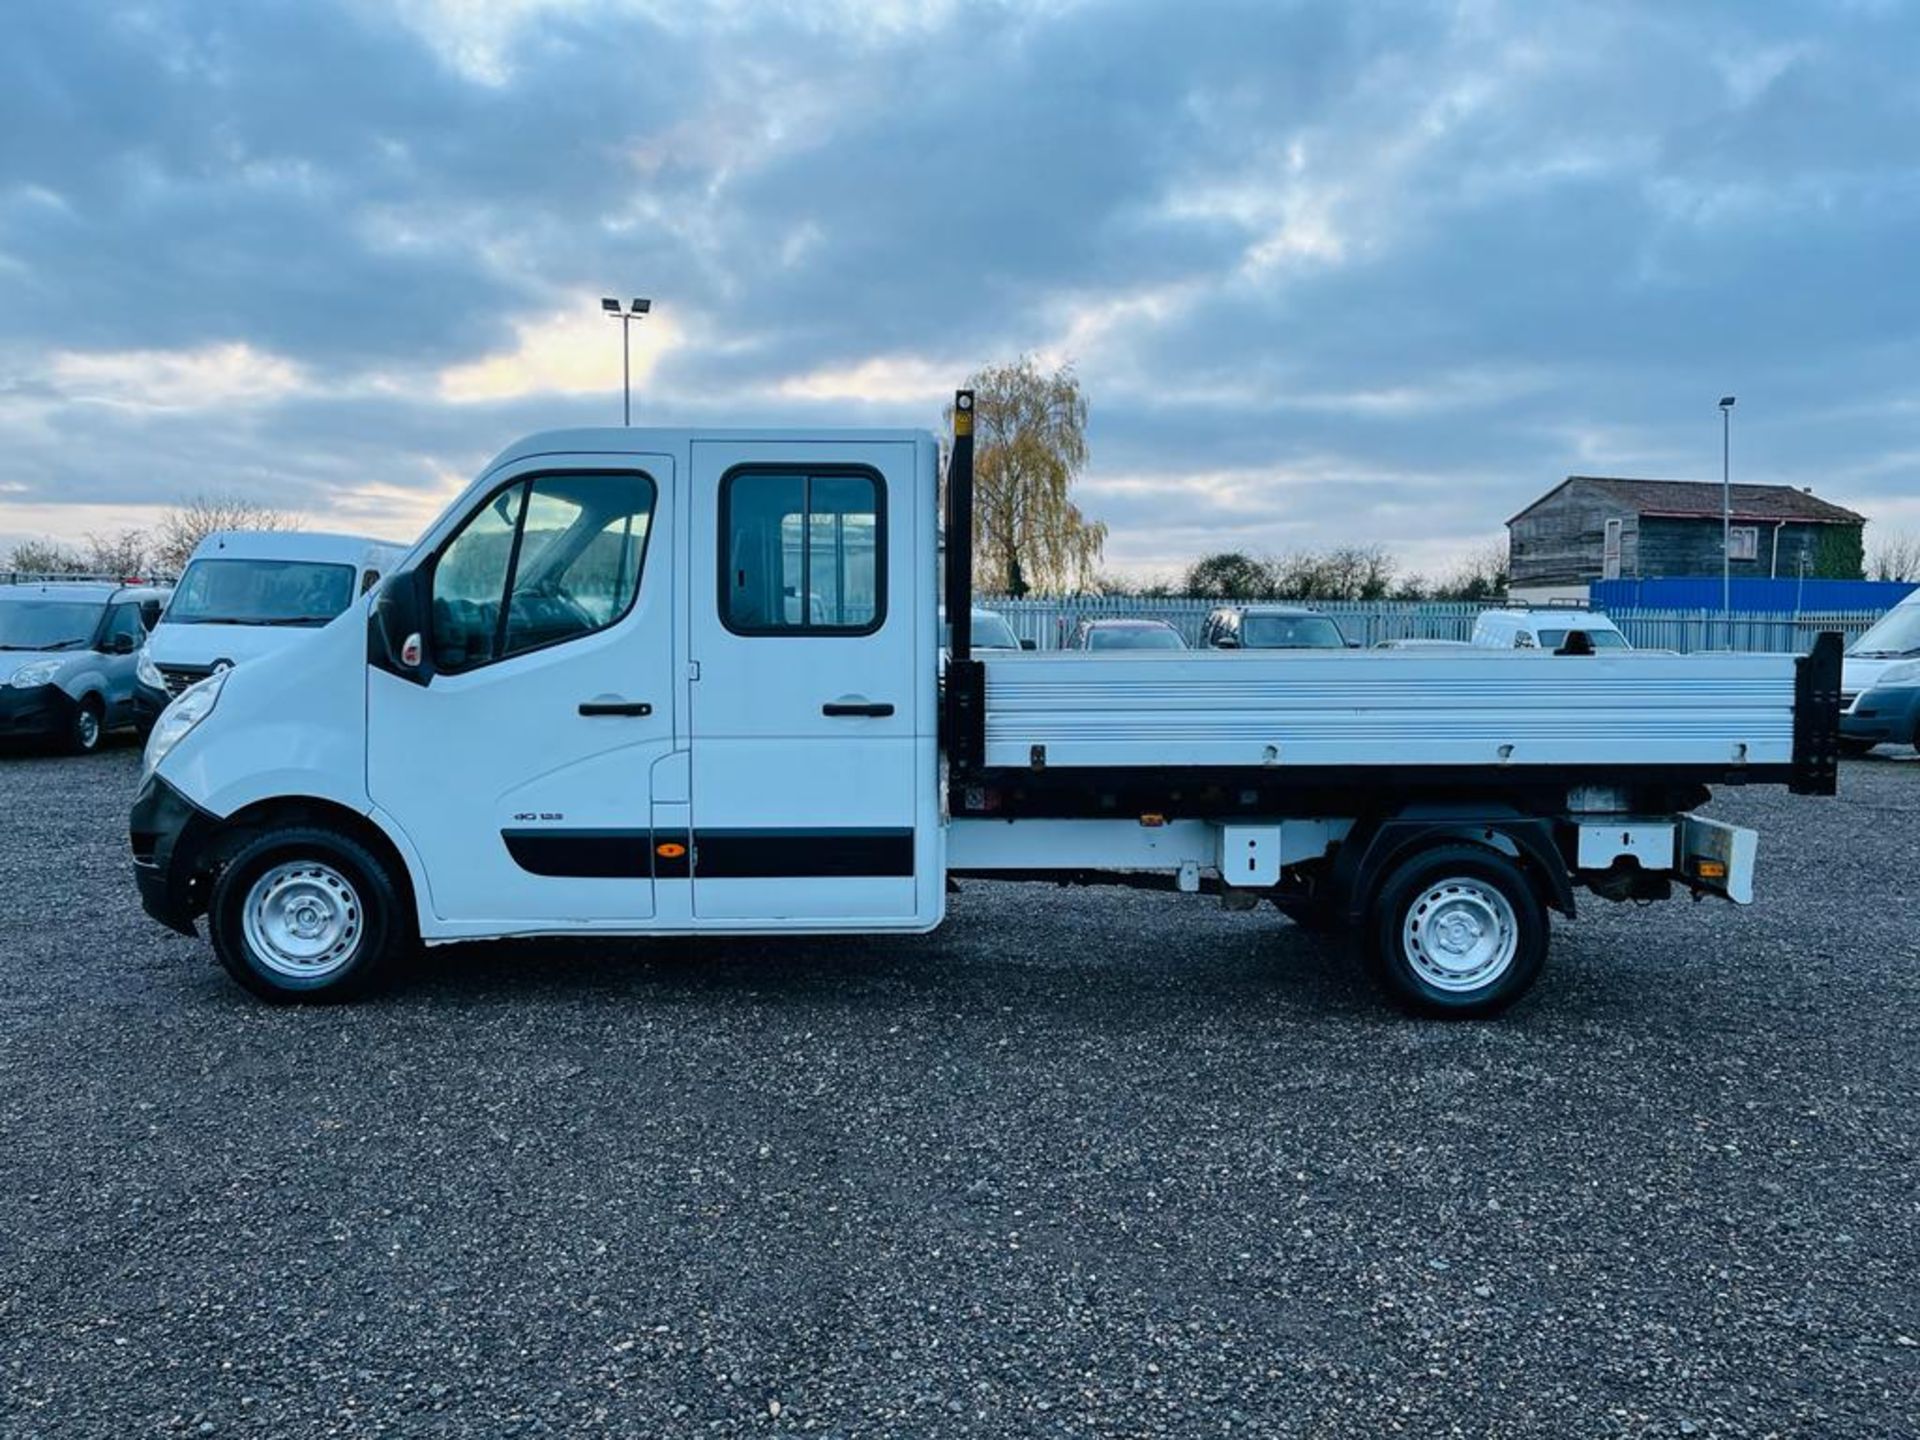 ** ON SALE ** Renault Master 2.3 DCI 125 LL35 DRW RWD L3 Crew Tipper 2013 '13 Reg' - Image 5 of 32